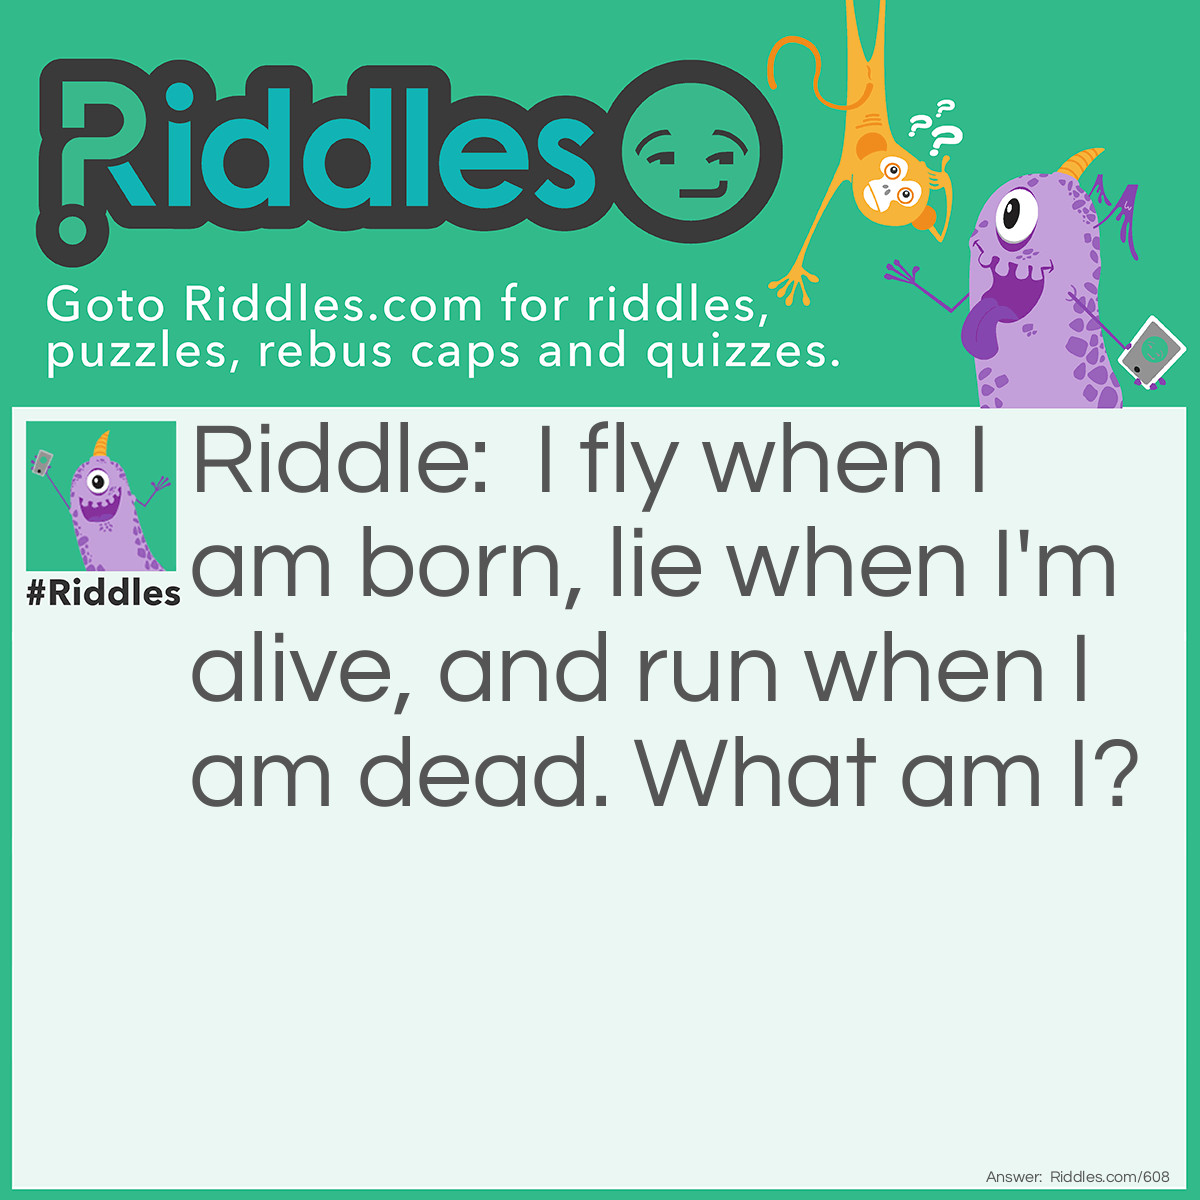 Riddle: I fly when I am born, lie when I'm alive, and run when I am dead.
What am I? Answer: A snowflake.